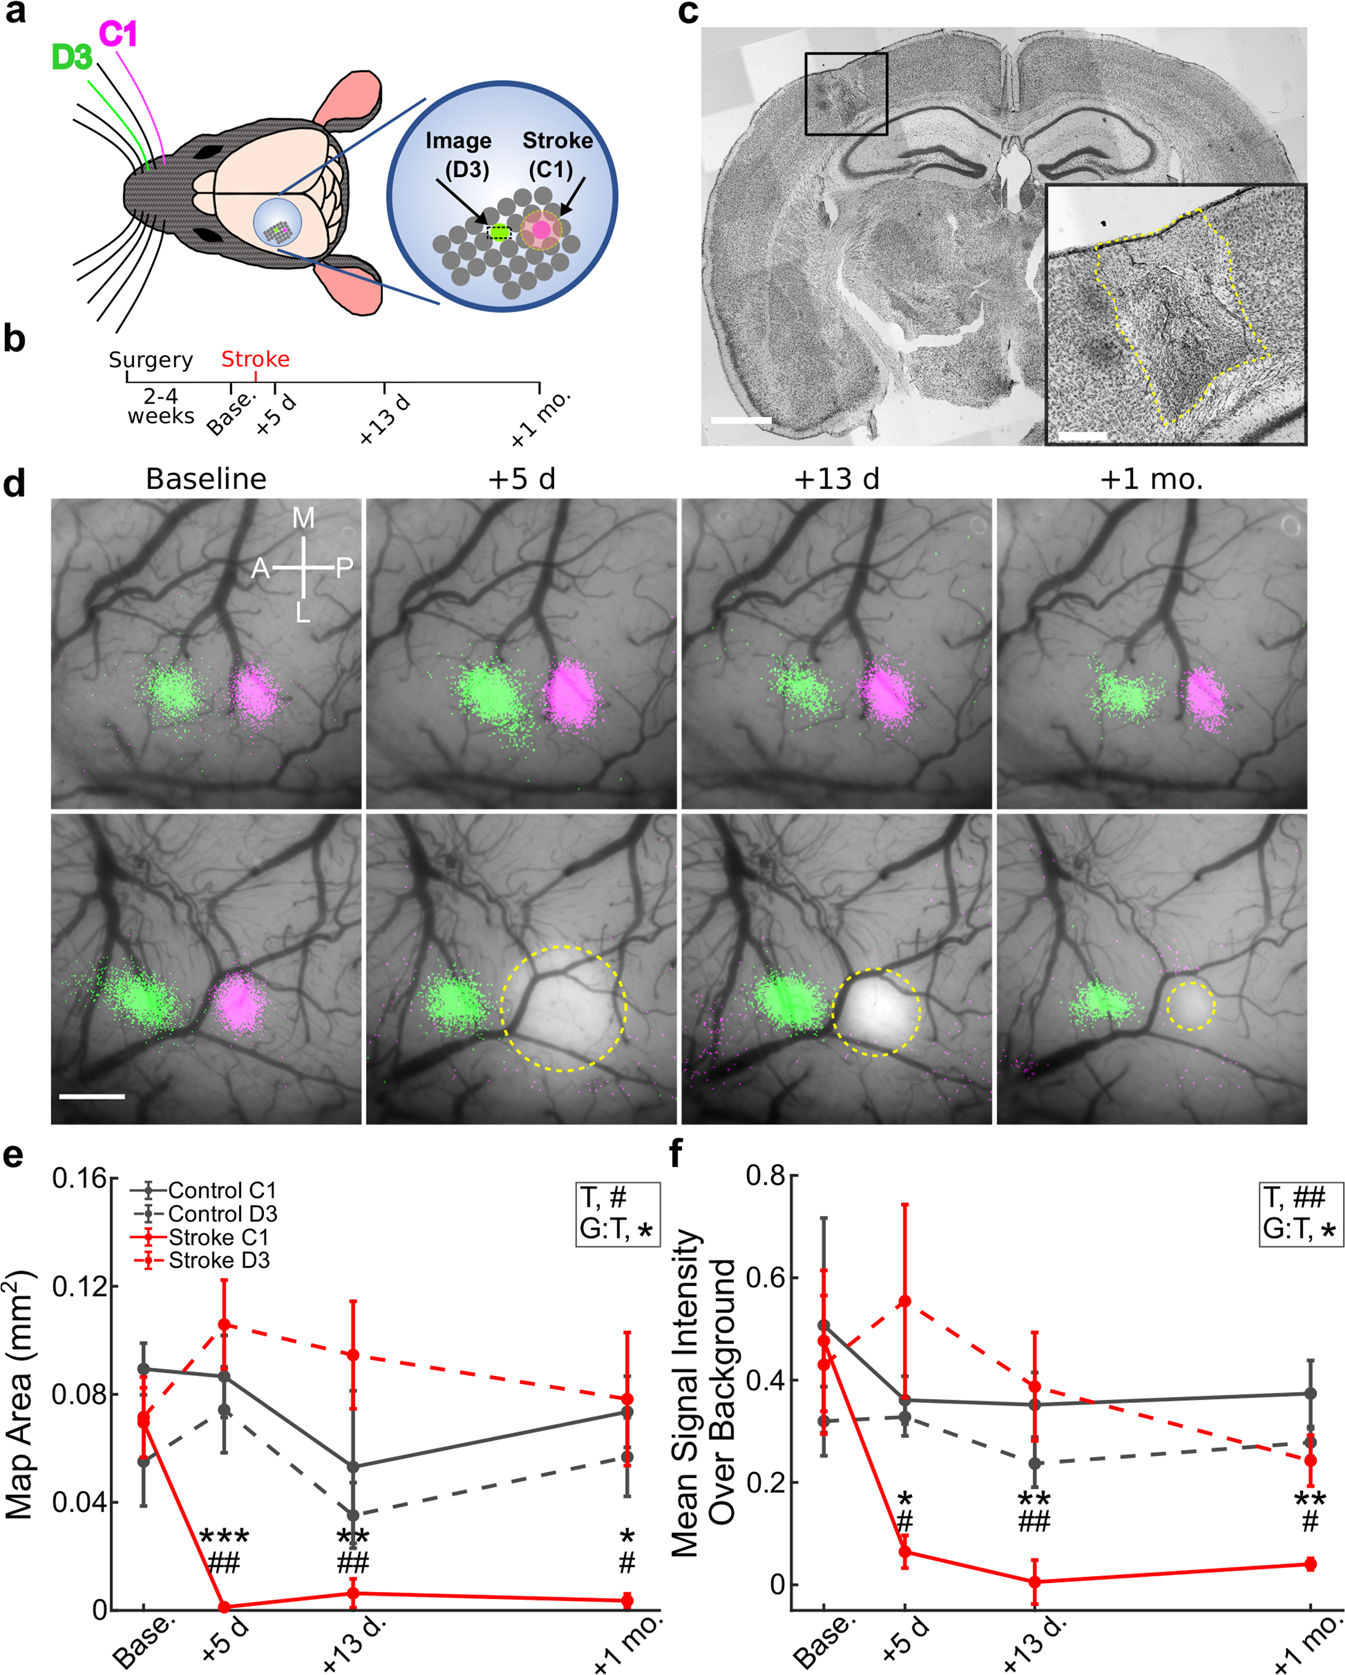 Barrel cortex plasticity after photothrombotic stroke involves potentiating  responses of pre-existing circuits but not functional remapping to new  circuits | Nature Communications